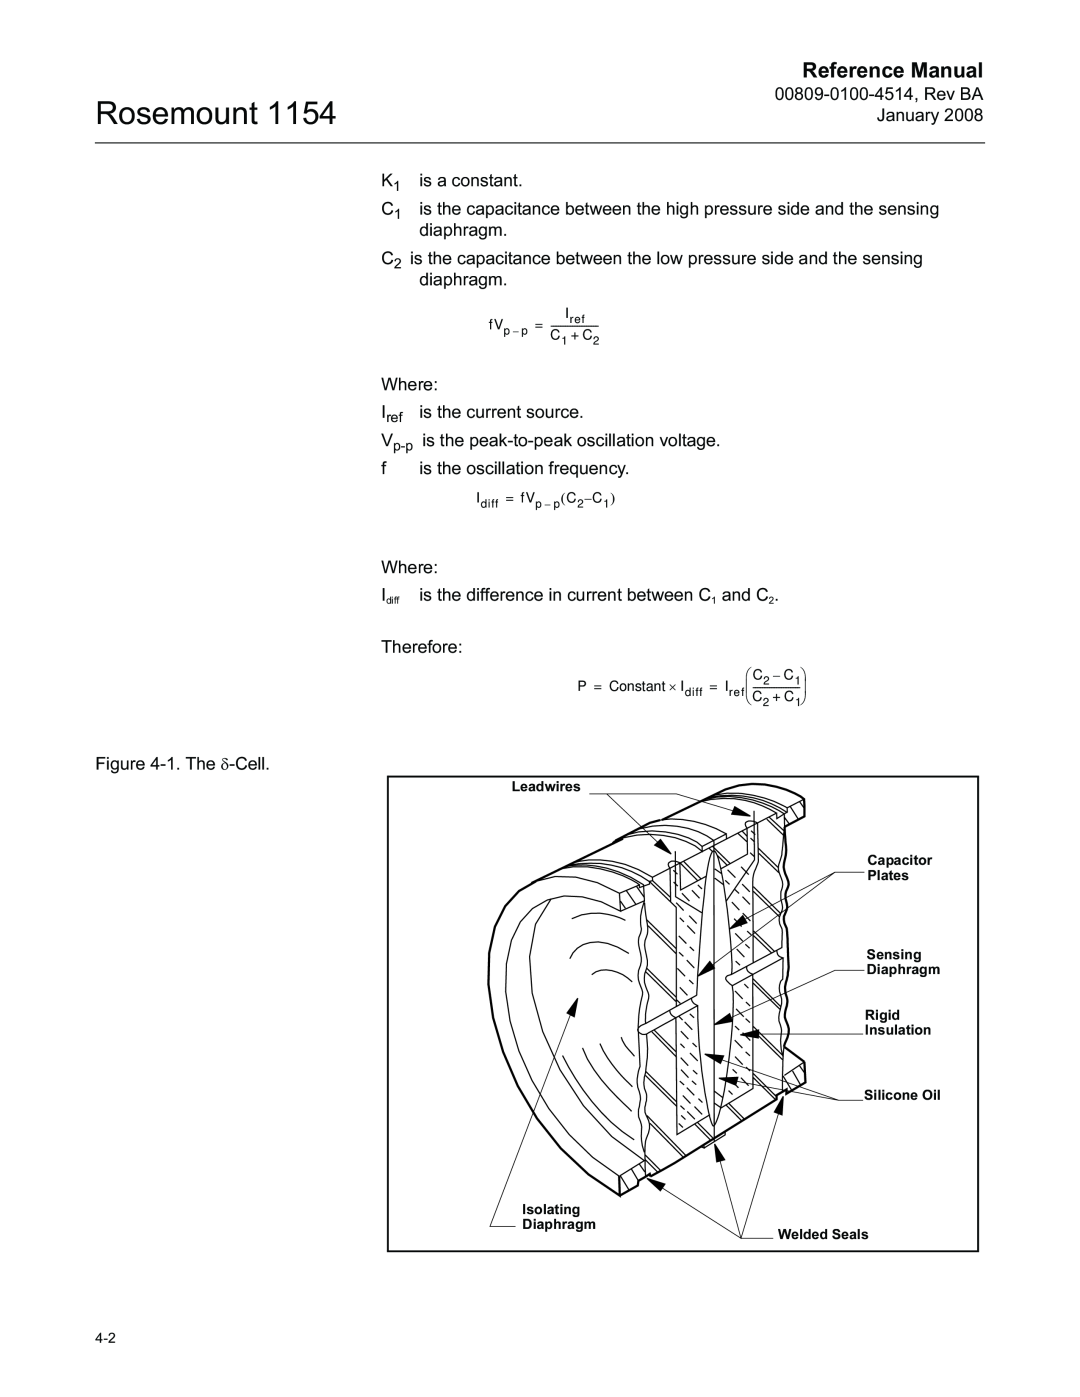 Emerson 00809-0100-4514, 1154 Rosemount, Reference Manual, P =, Constant ×, ⎛ C 2 - C 1⎞, Leadwires Isolating Diaphragm 